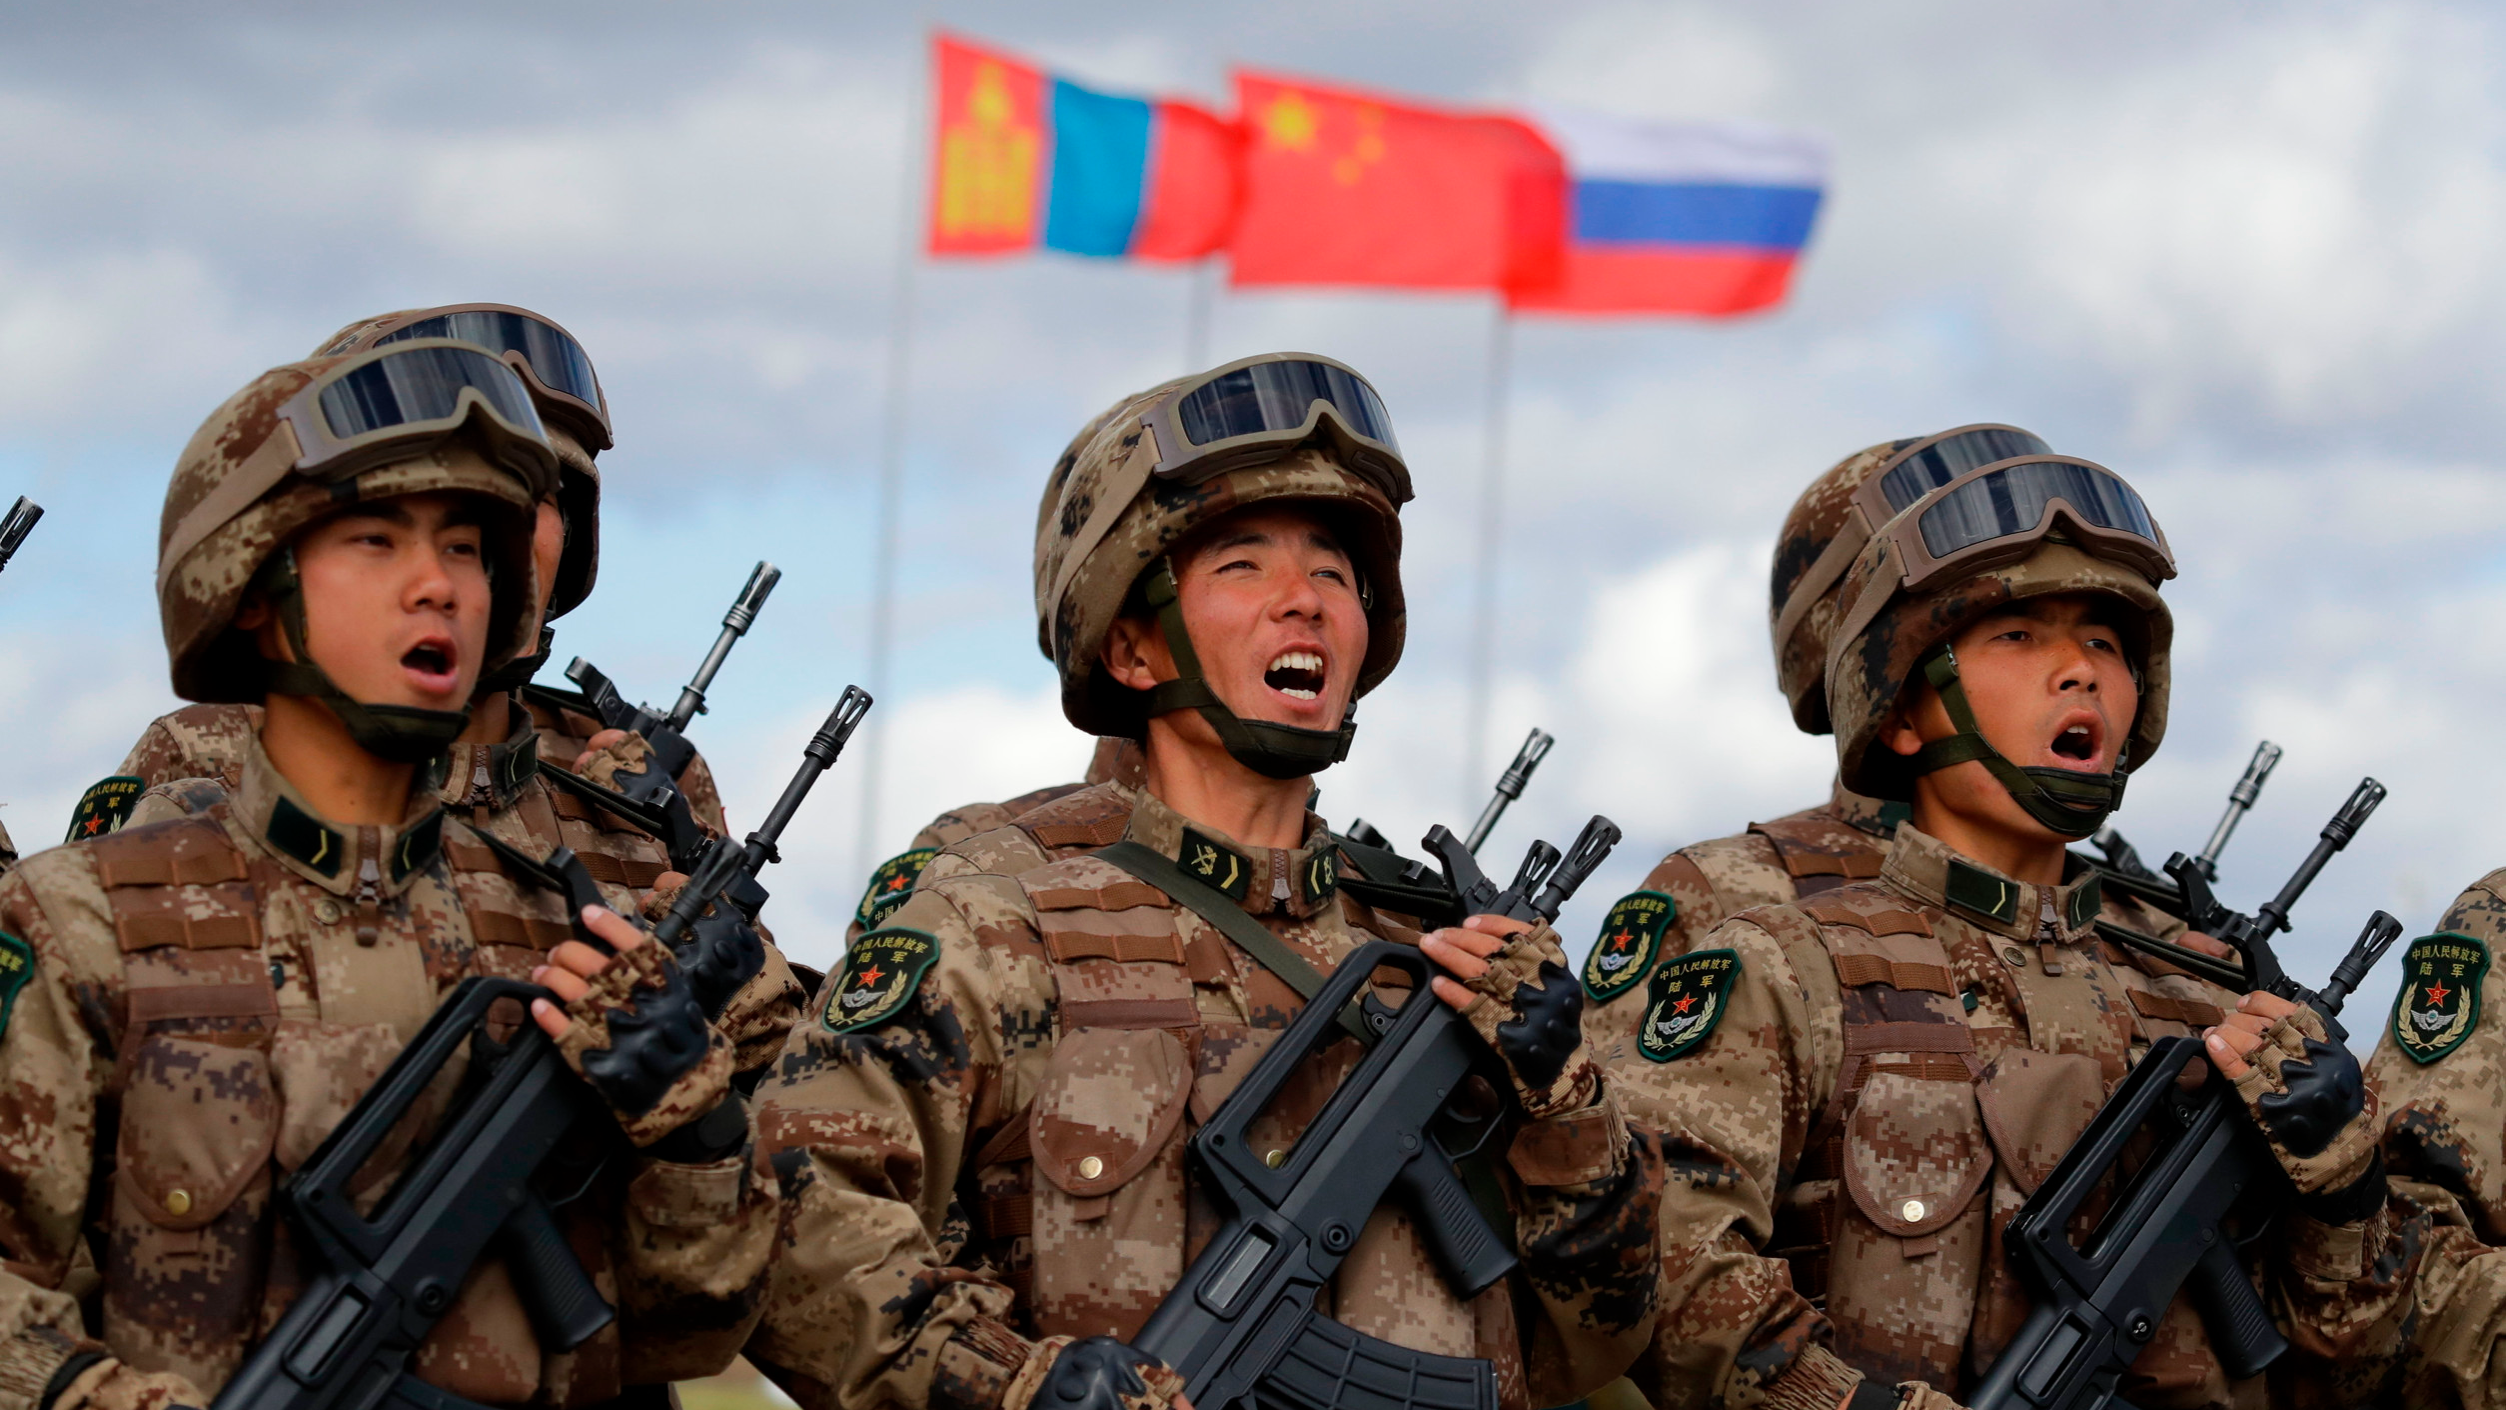 China and Russia join forces for Vostok military exercises | Financial Times